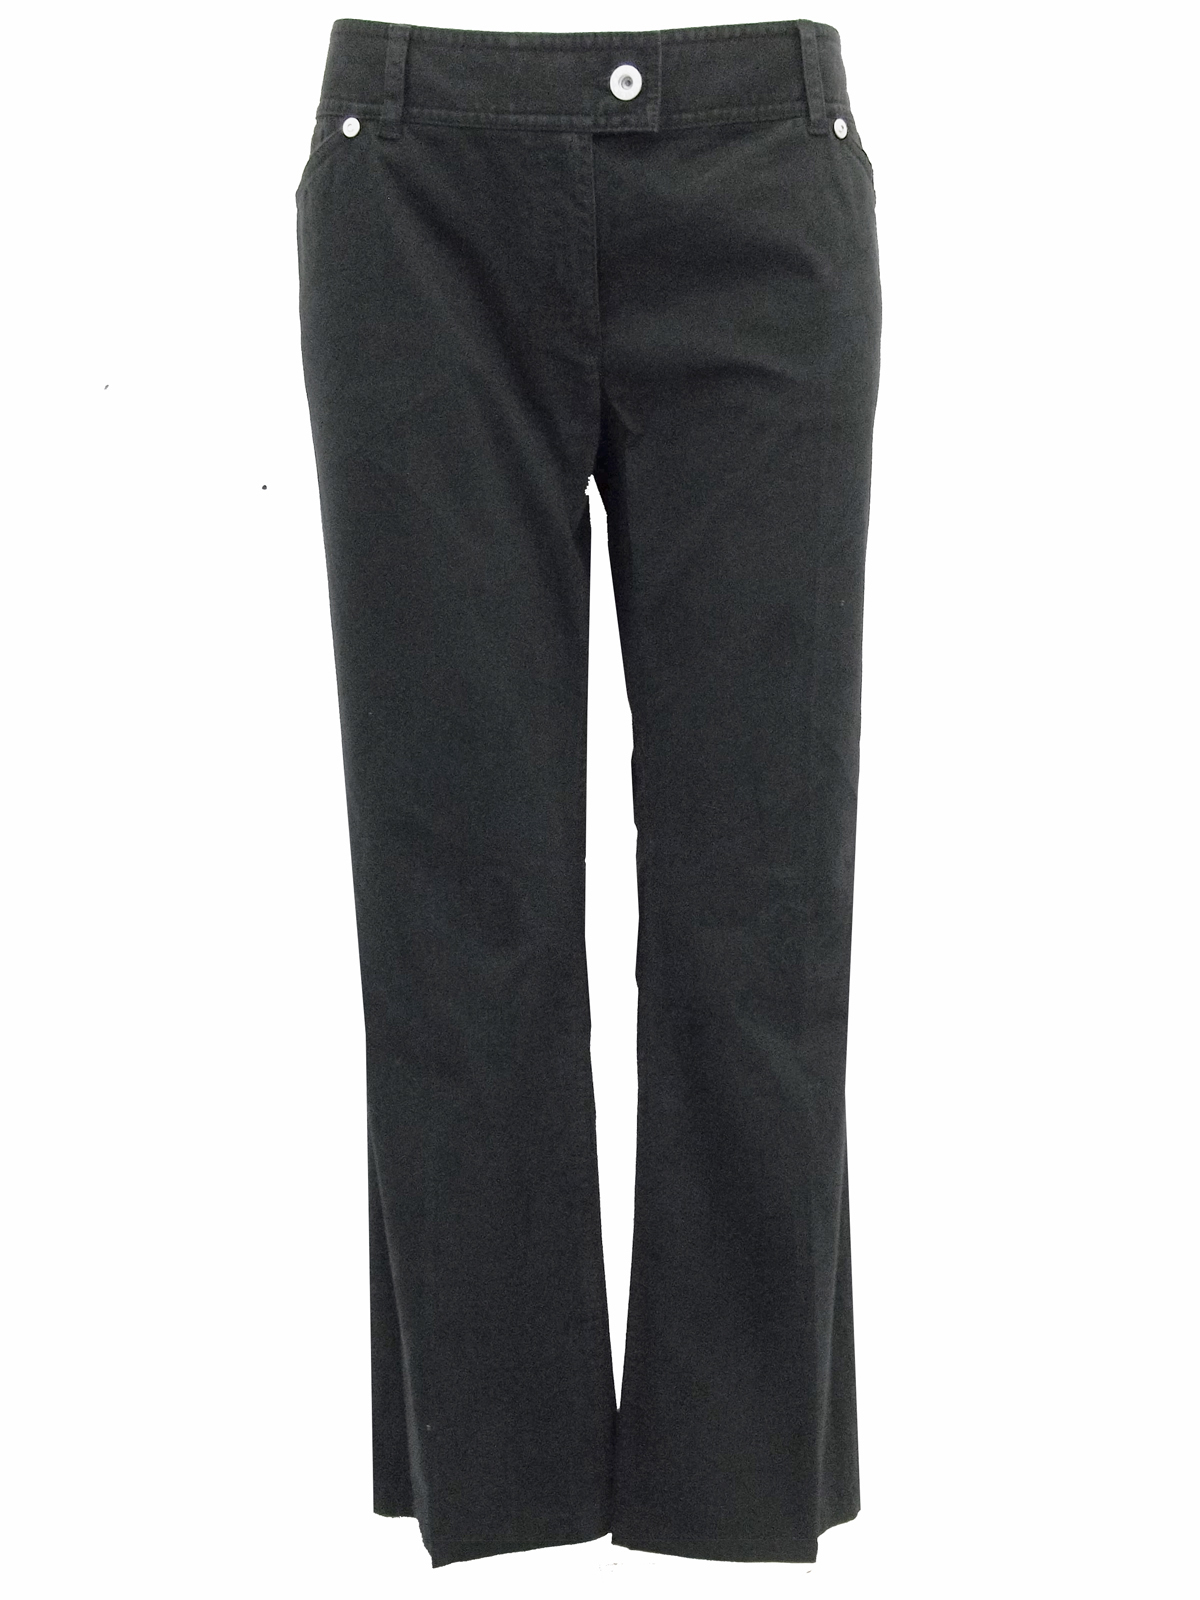 Marks and Spencer - - M&5 BLACK Cotton Rich Cargo Trousers - Size 14 to 18